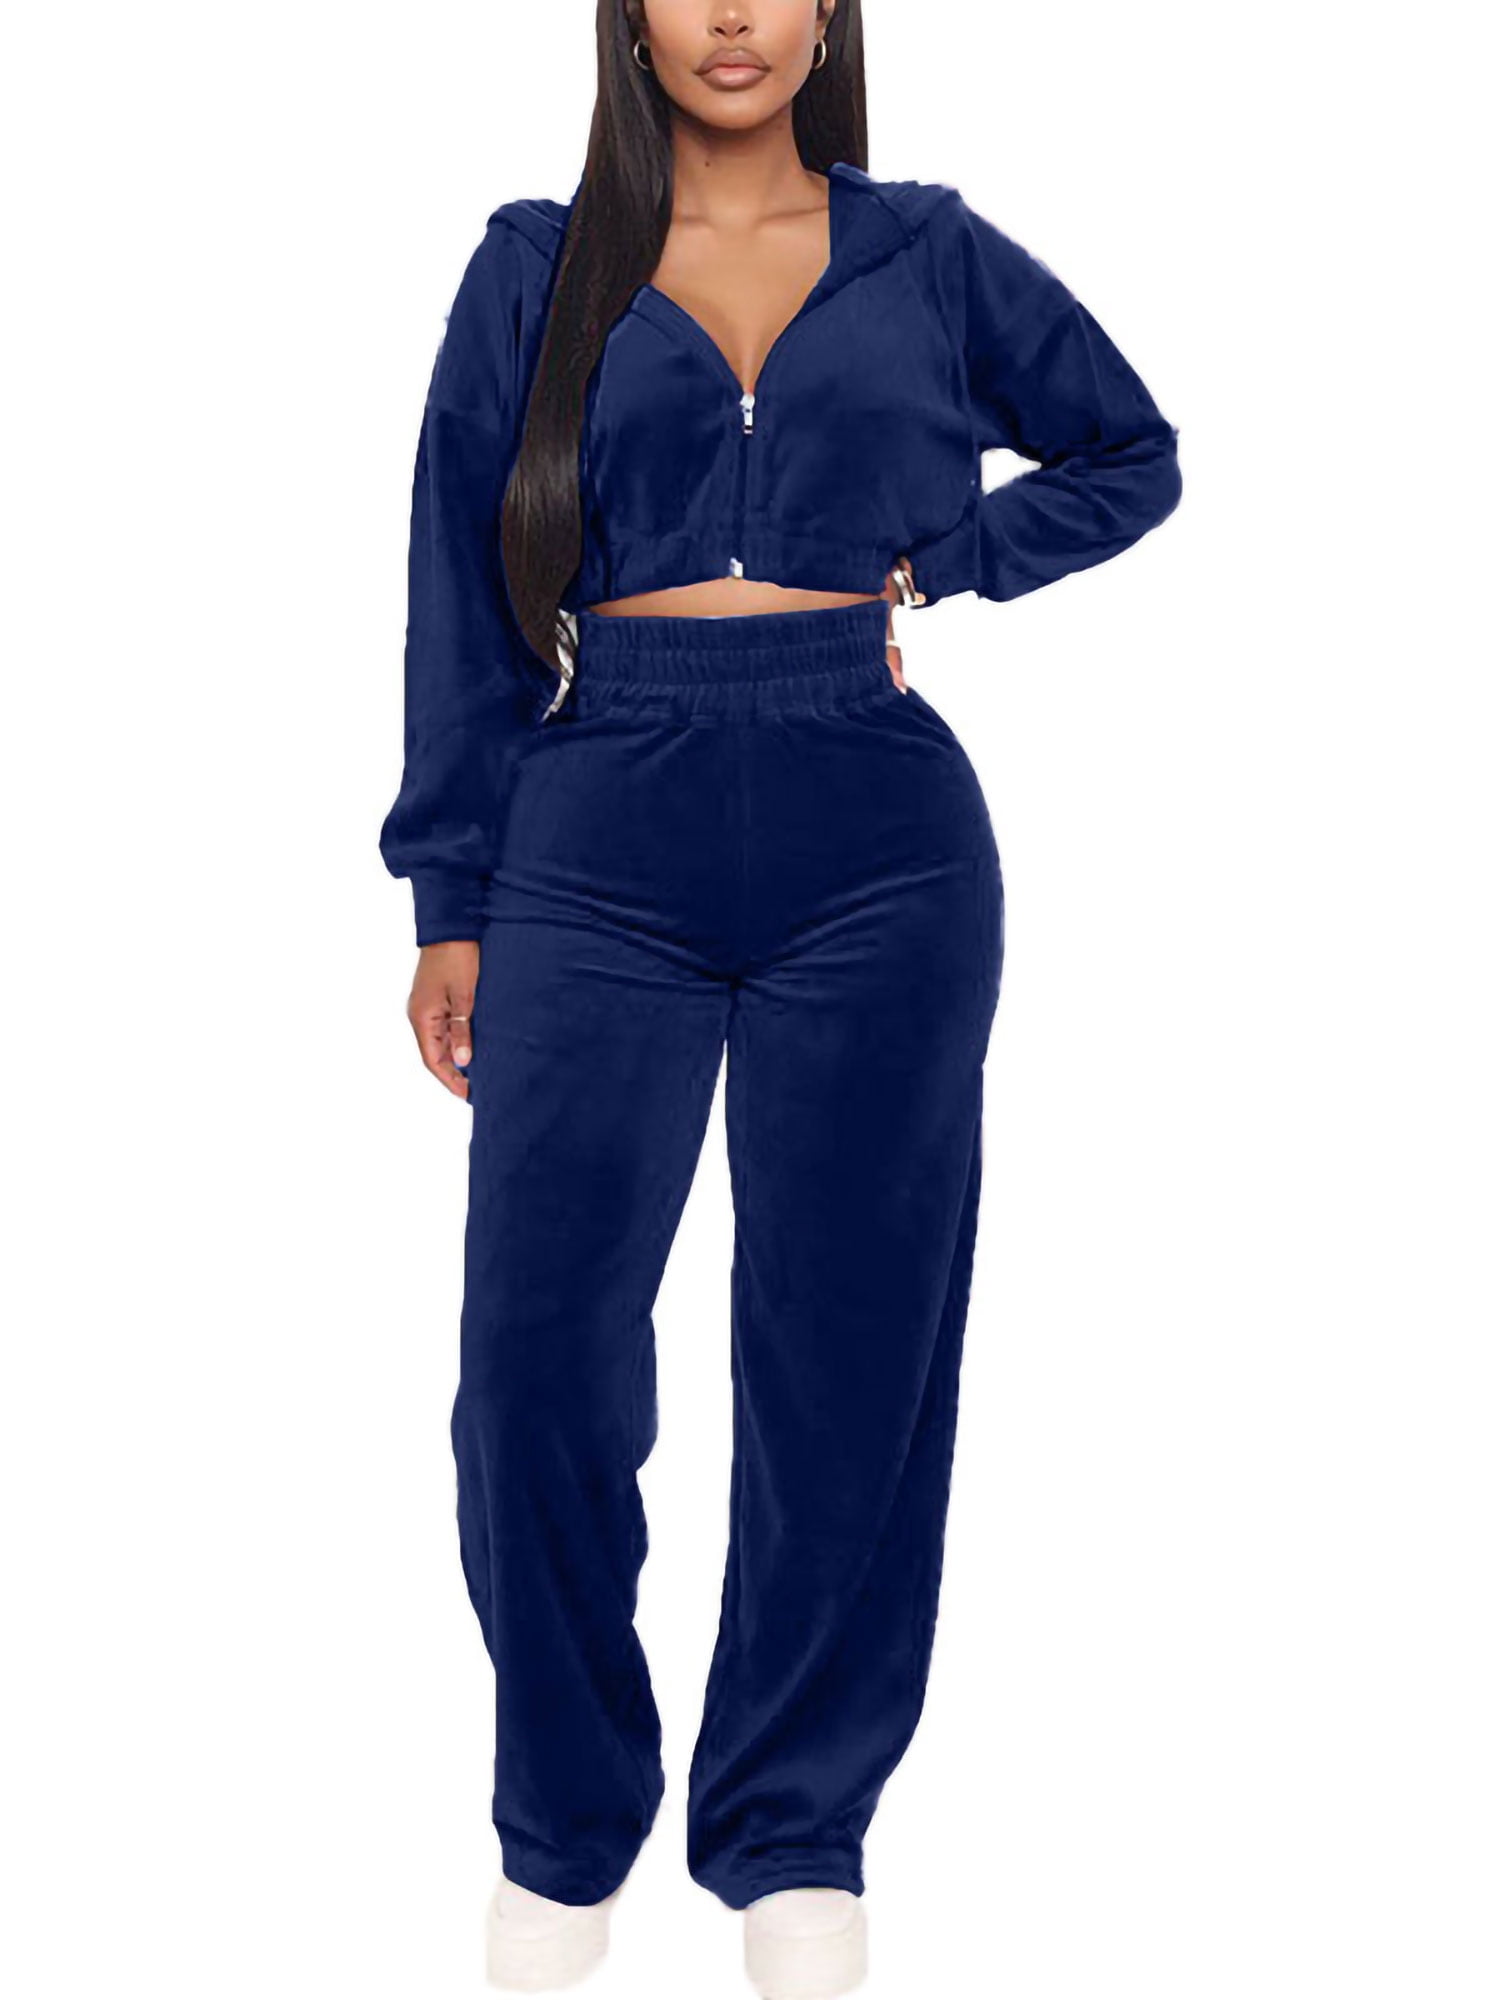 WOMEN'S HOODED VELOUR OUTERWEAR OUTFIT/SUIT 